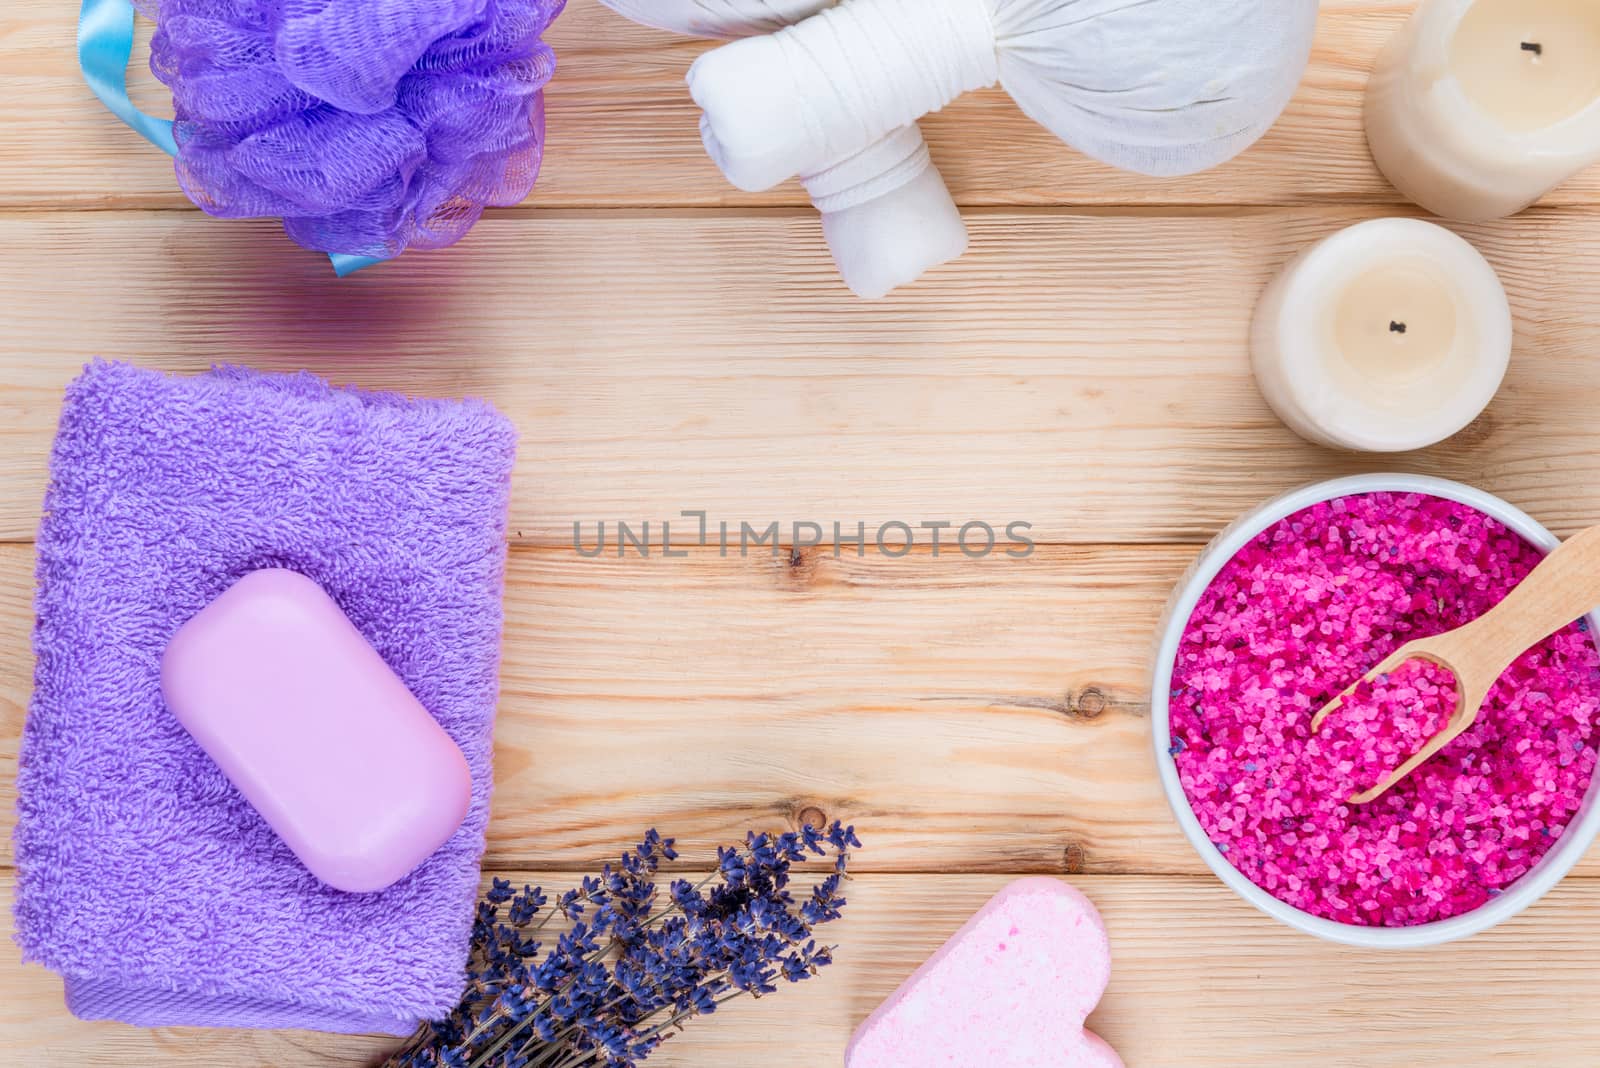 concept photo - lavender objects for spa, massage and relaxation by kosmsos111